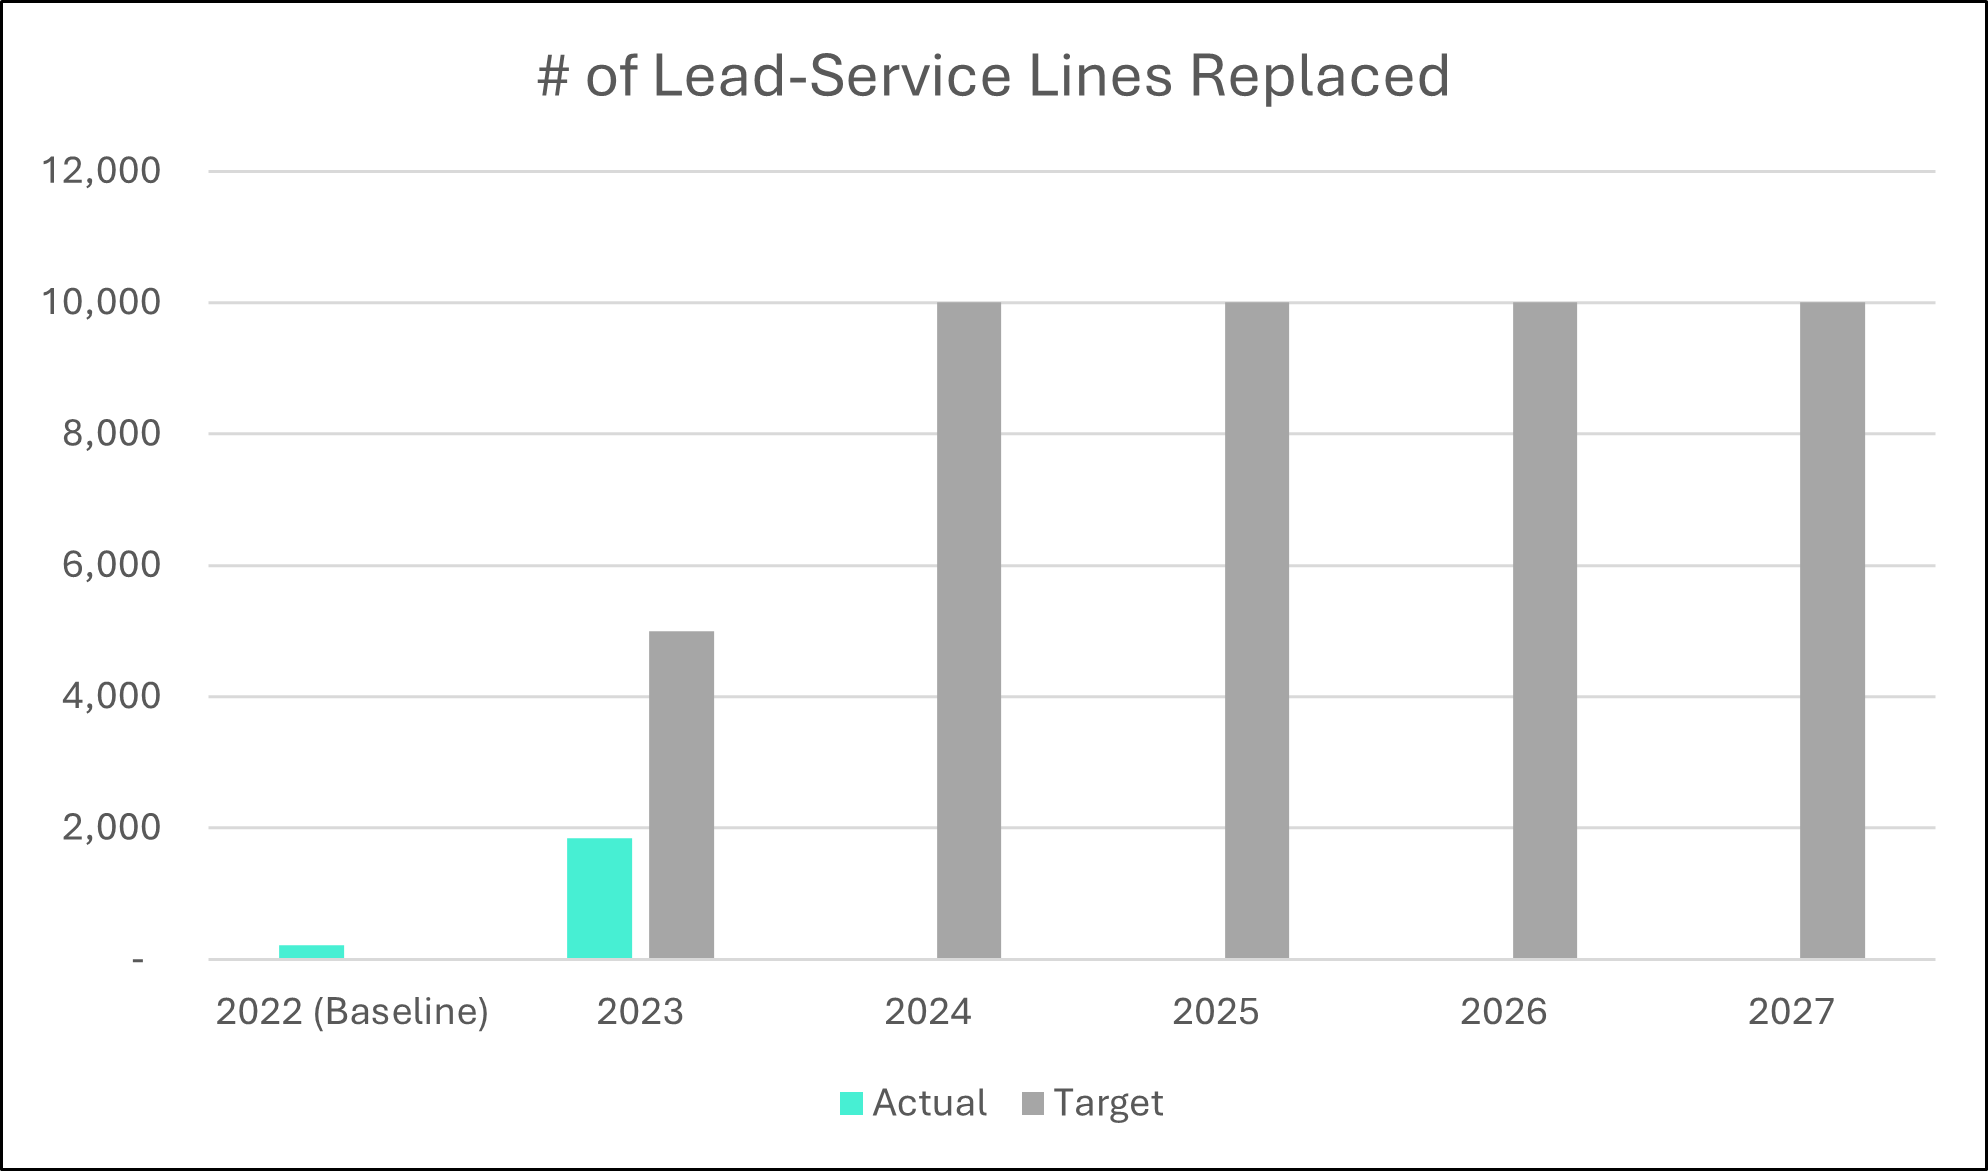 Lead-service Lines Replaced